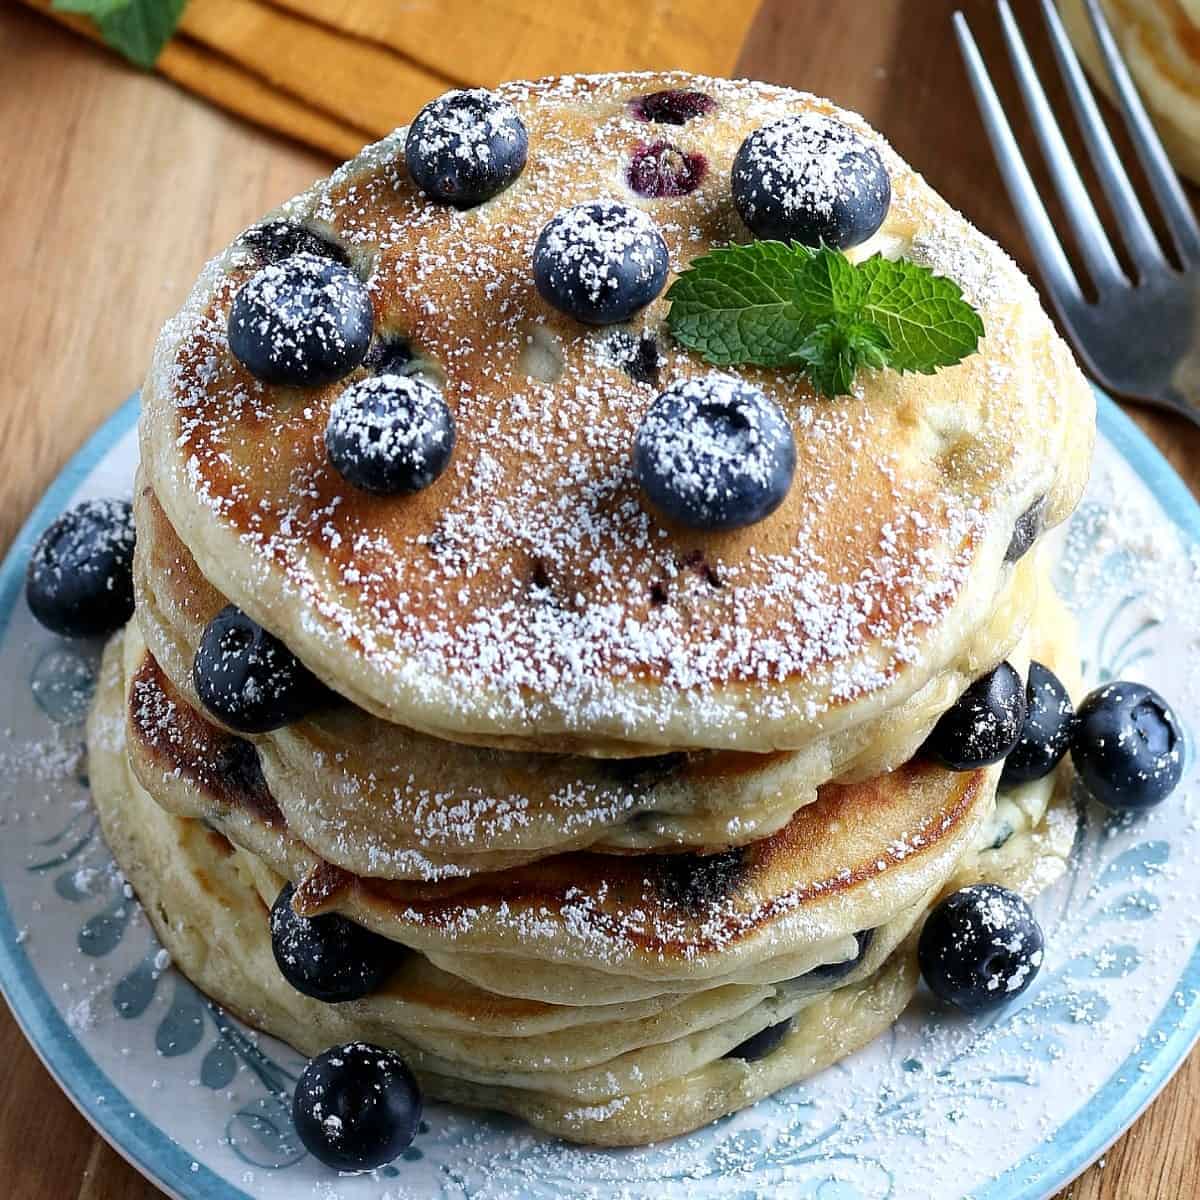 A stack of a vegan pancakes recipe cooked and sitting on a plate.